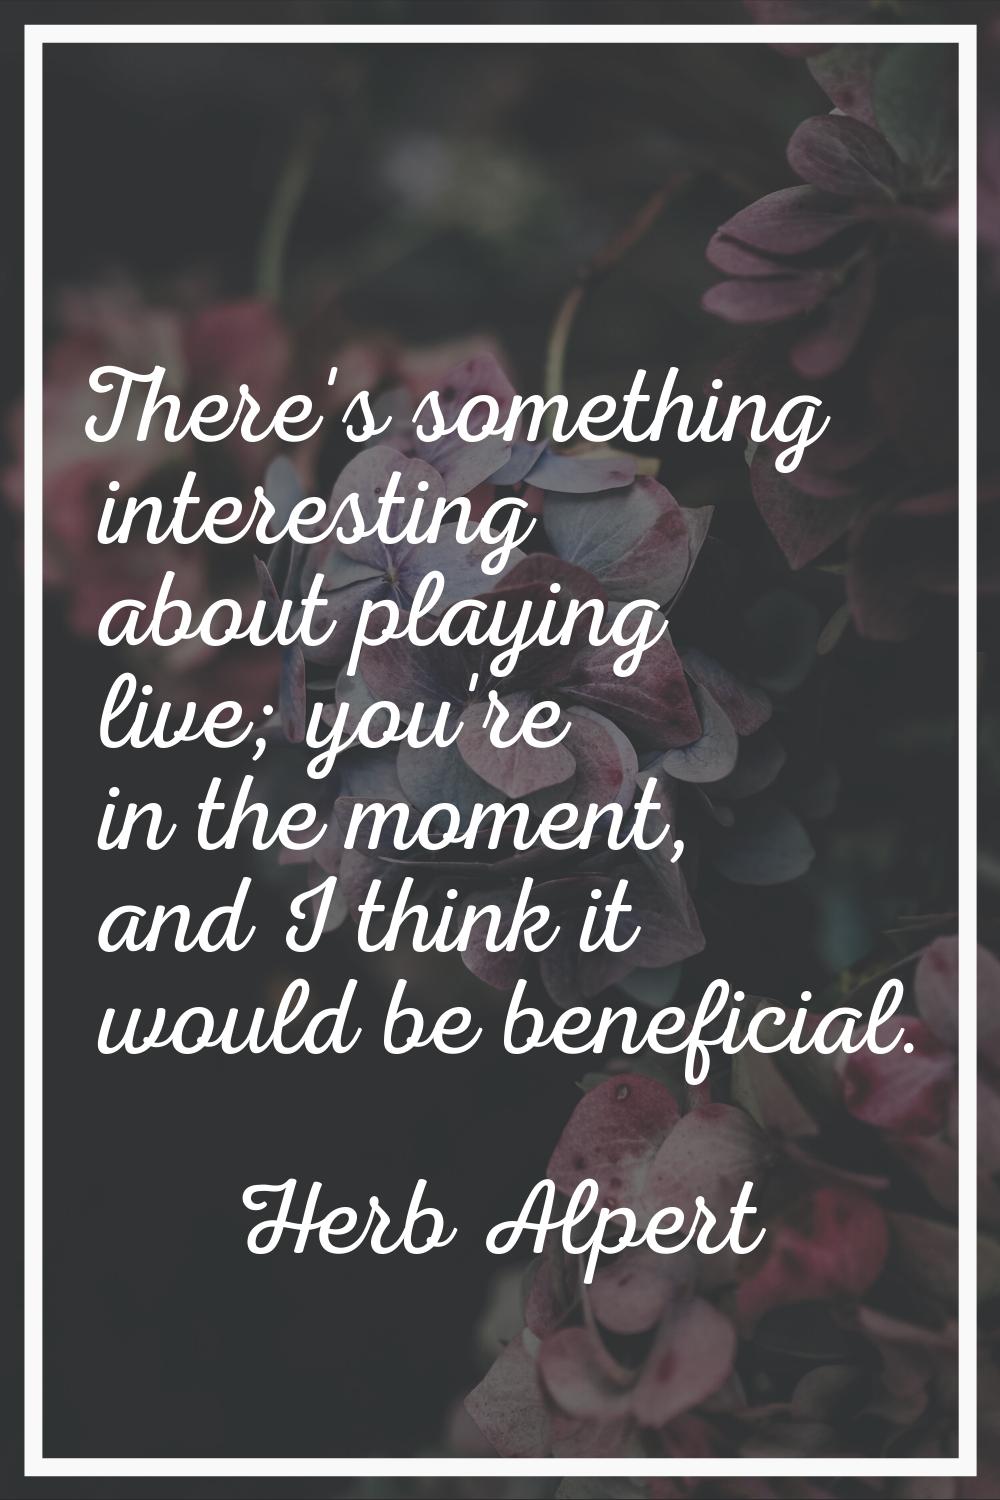 There's something interesting about playing live; you're in the moment, and I think it would be ben